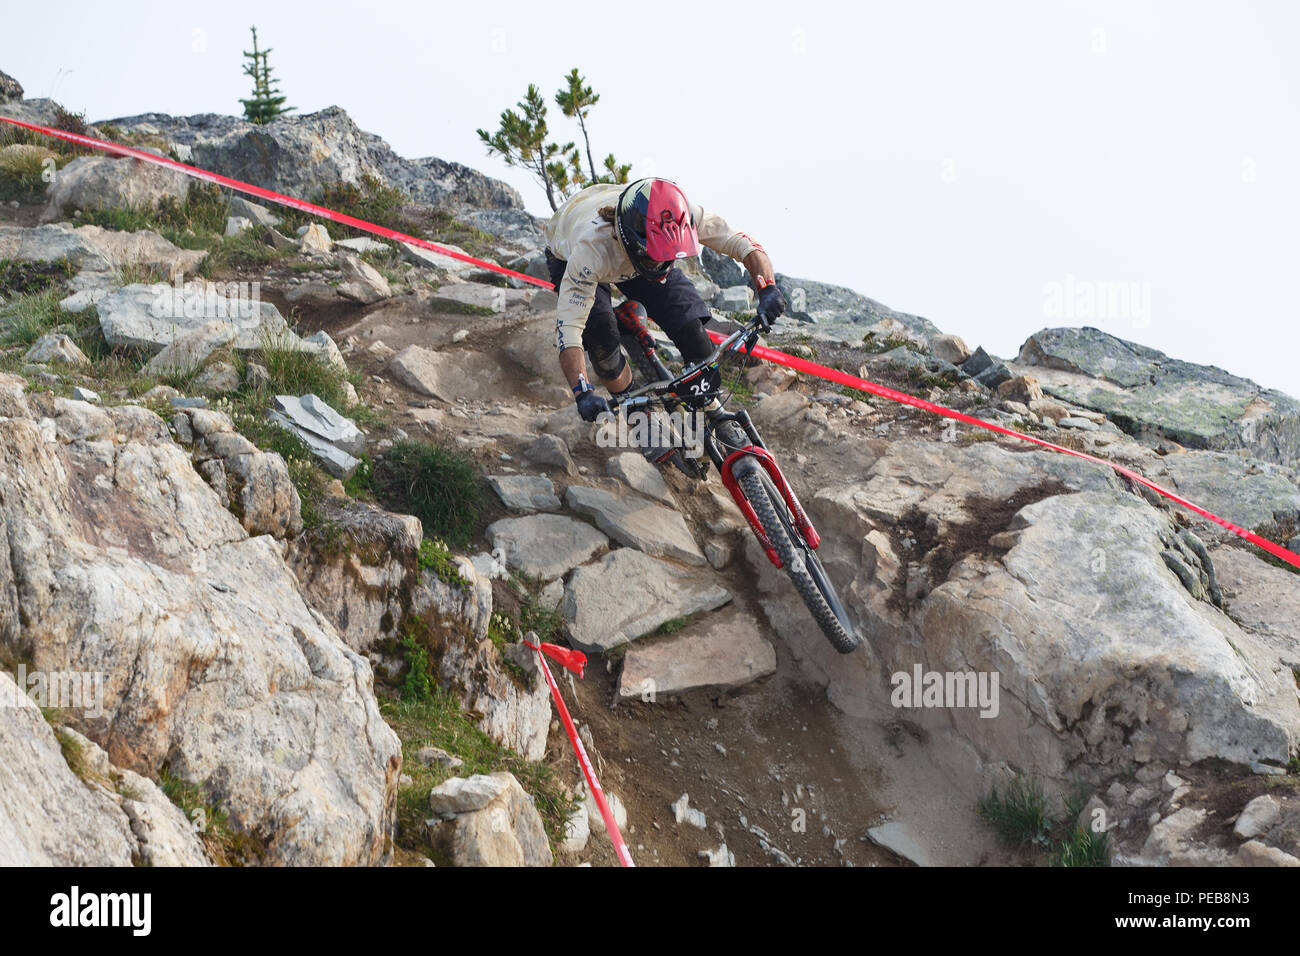 Whistler, Canada. 15th Aug 2018. Whistler, British Columbia, Canada. 12th August, 2018. Yoann Barelli (FRA) of the Commencal Vallnord Enduro Racing Team racing to fifth place at the August 12, 2018 Enduro World Series Camelbak Canadian Open Enduro presented by Specialized event in Whistler, British Columbia, Canada. Credit: Ironstring/Alamy Live News Credit: Ironstring/Alamy Live News Stock Photo